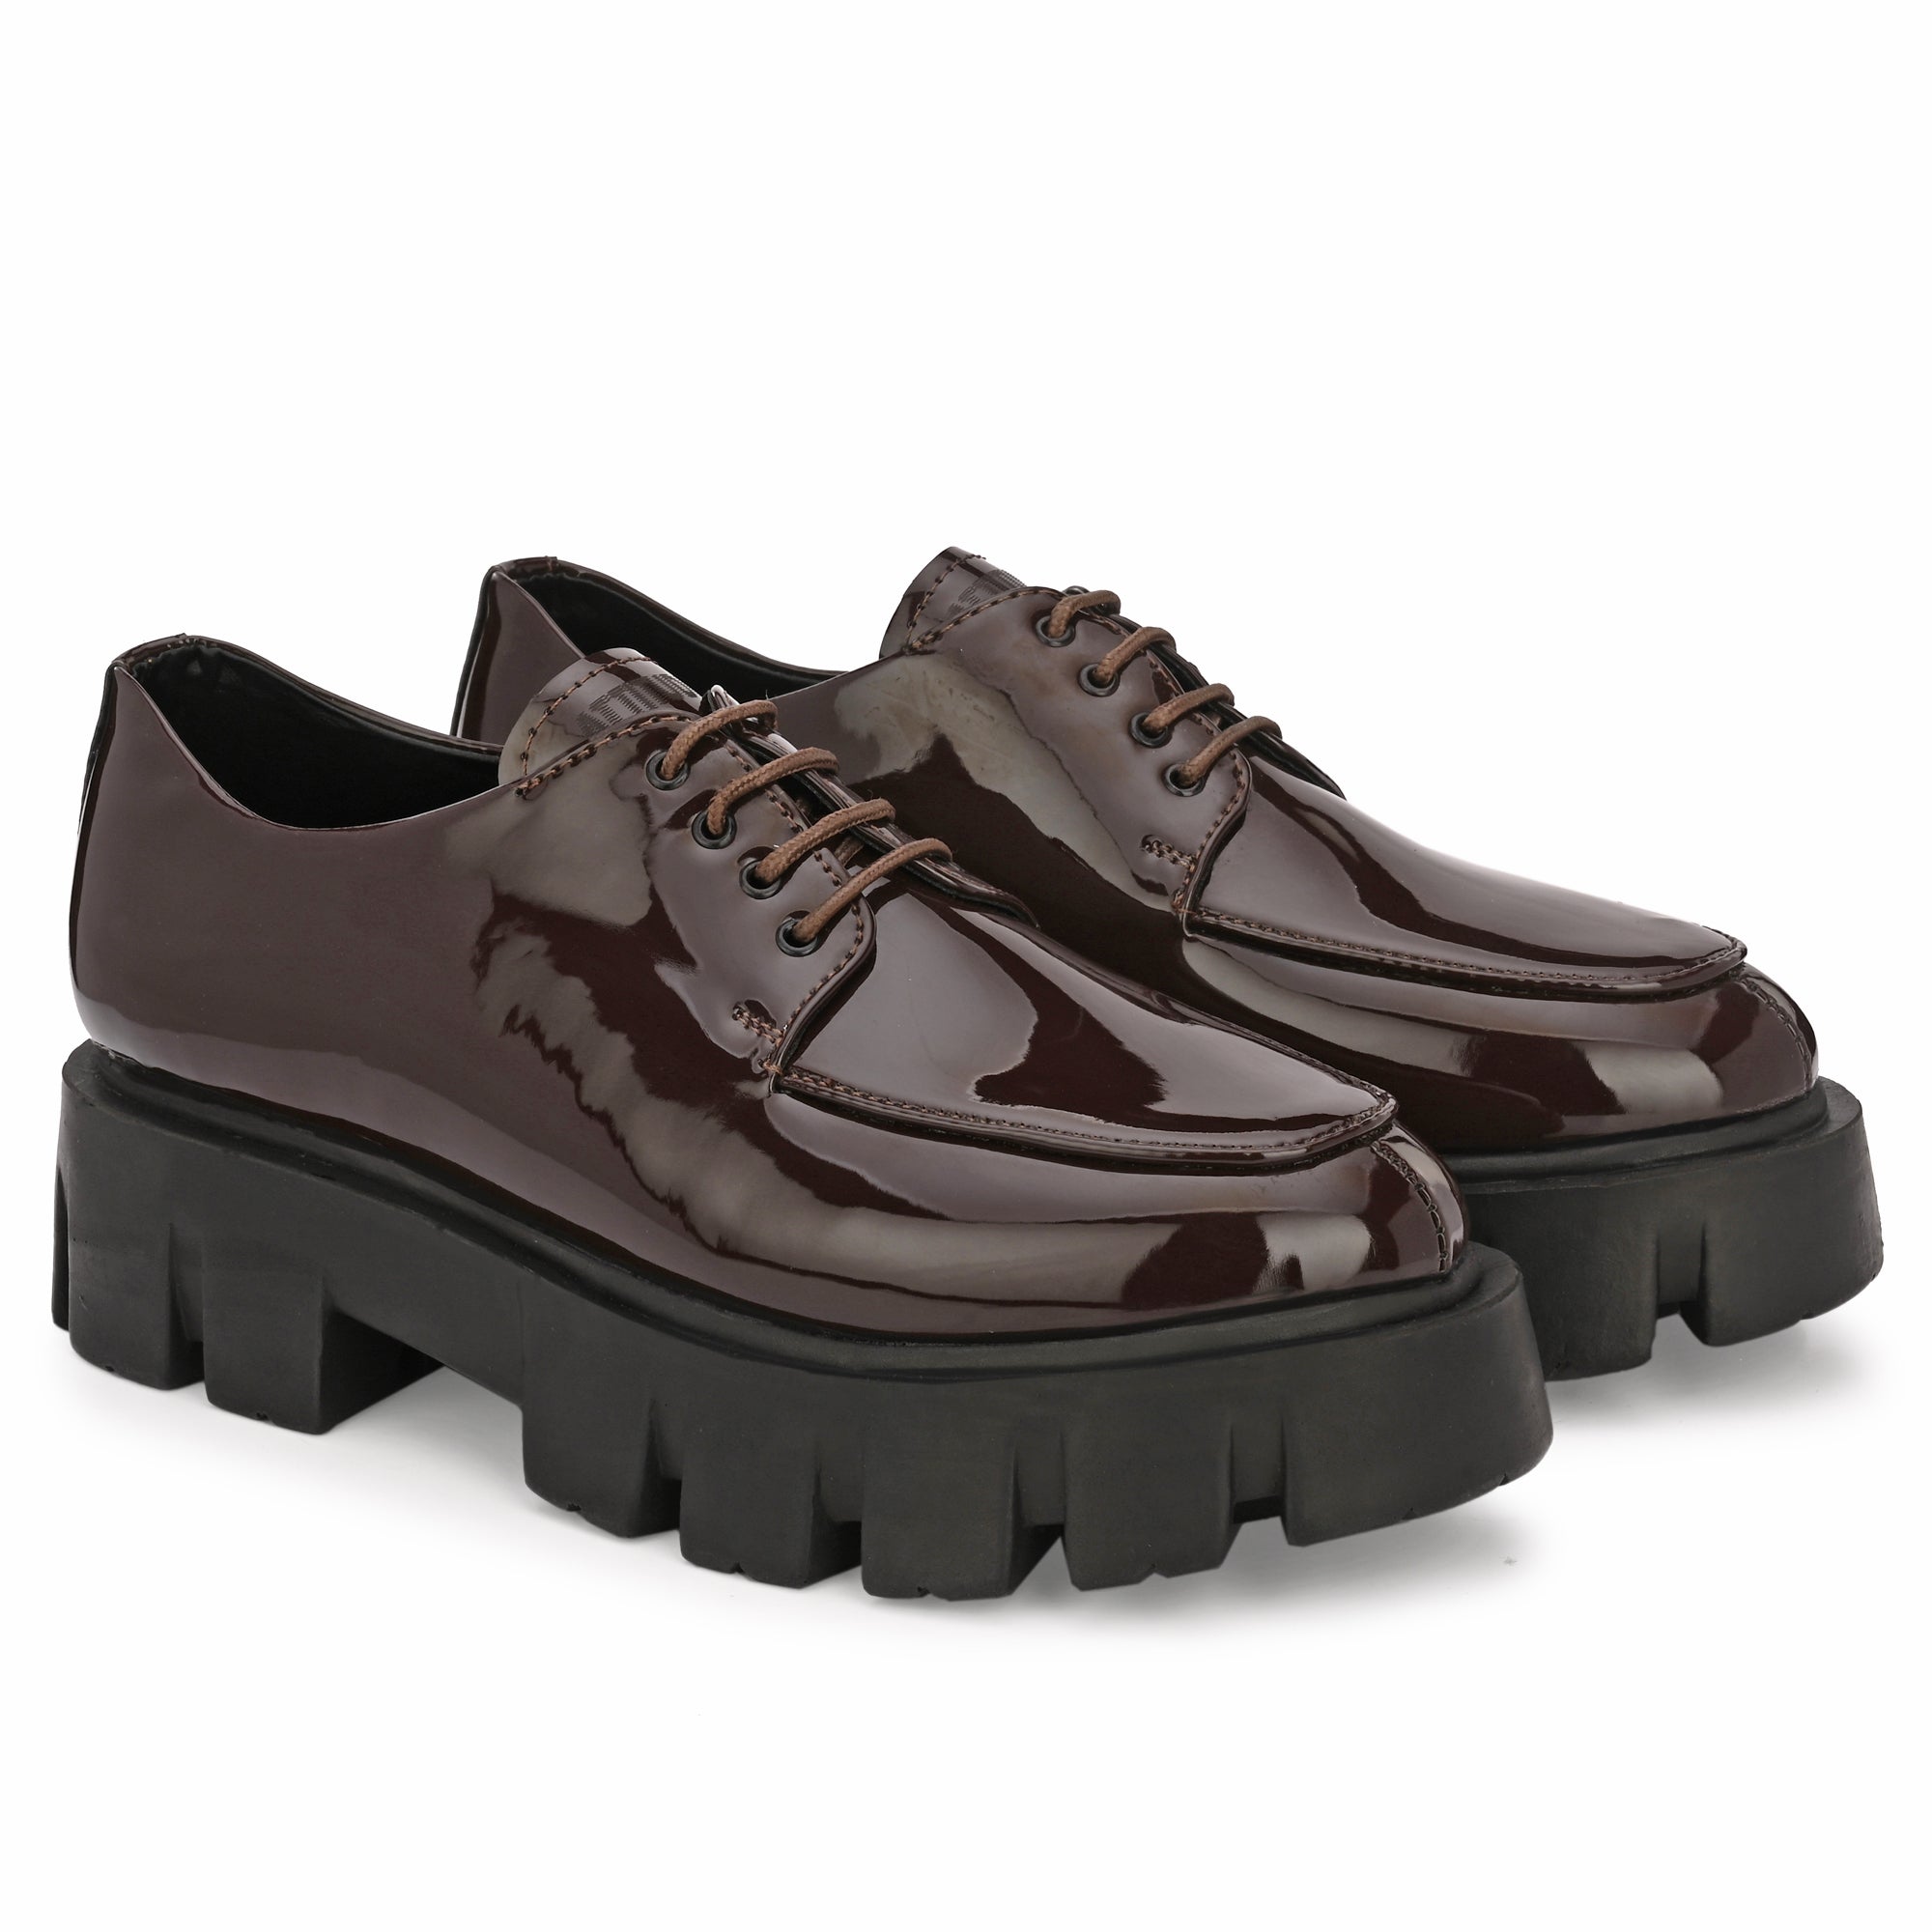 Attitudist Handcrafted Derby Glossy Black Lace-up Shoes With Criss Cross  Lacing For Men at Rs 999.00  Lace Shoes, फीते वाले जूते, लेस अप शूज -  Marketing King Online Private Limited, New